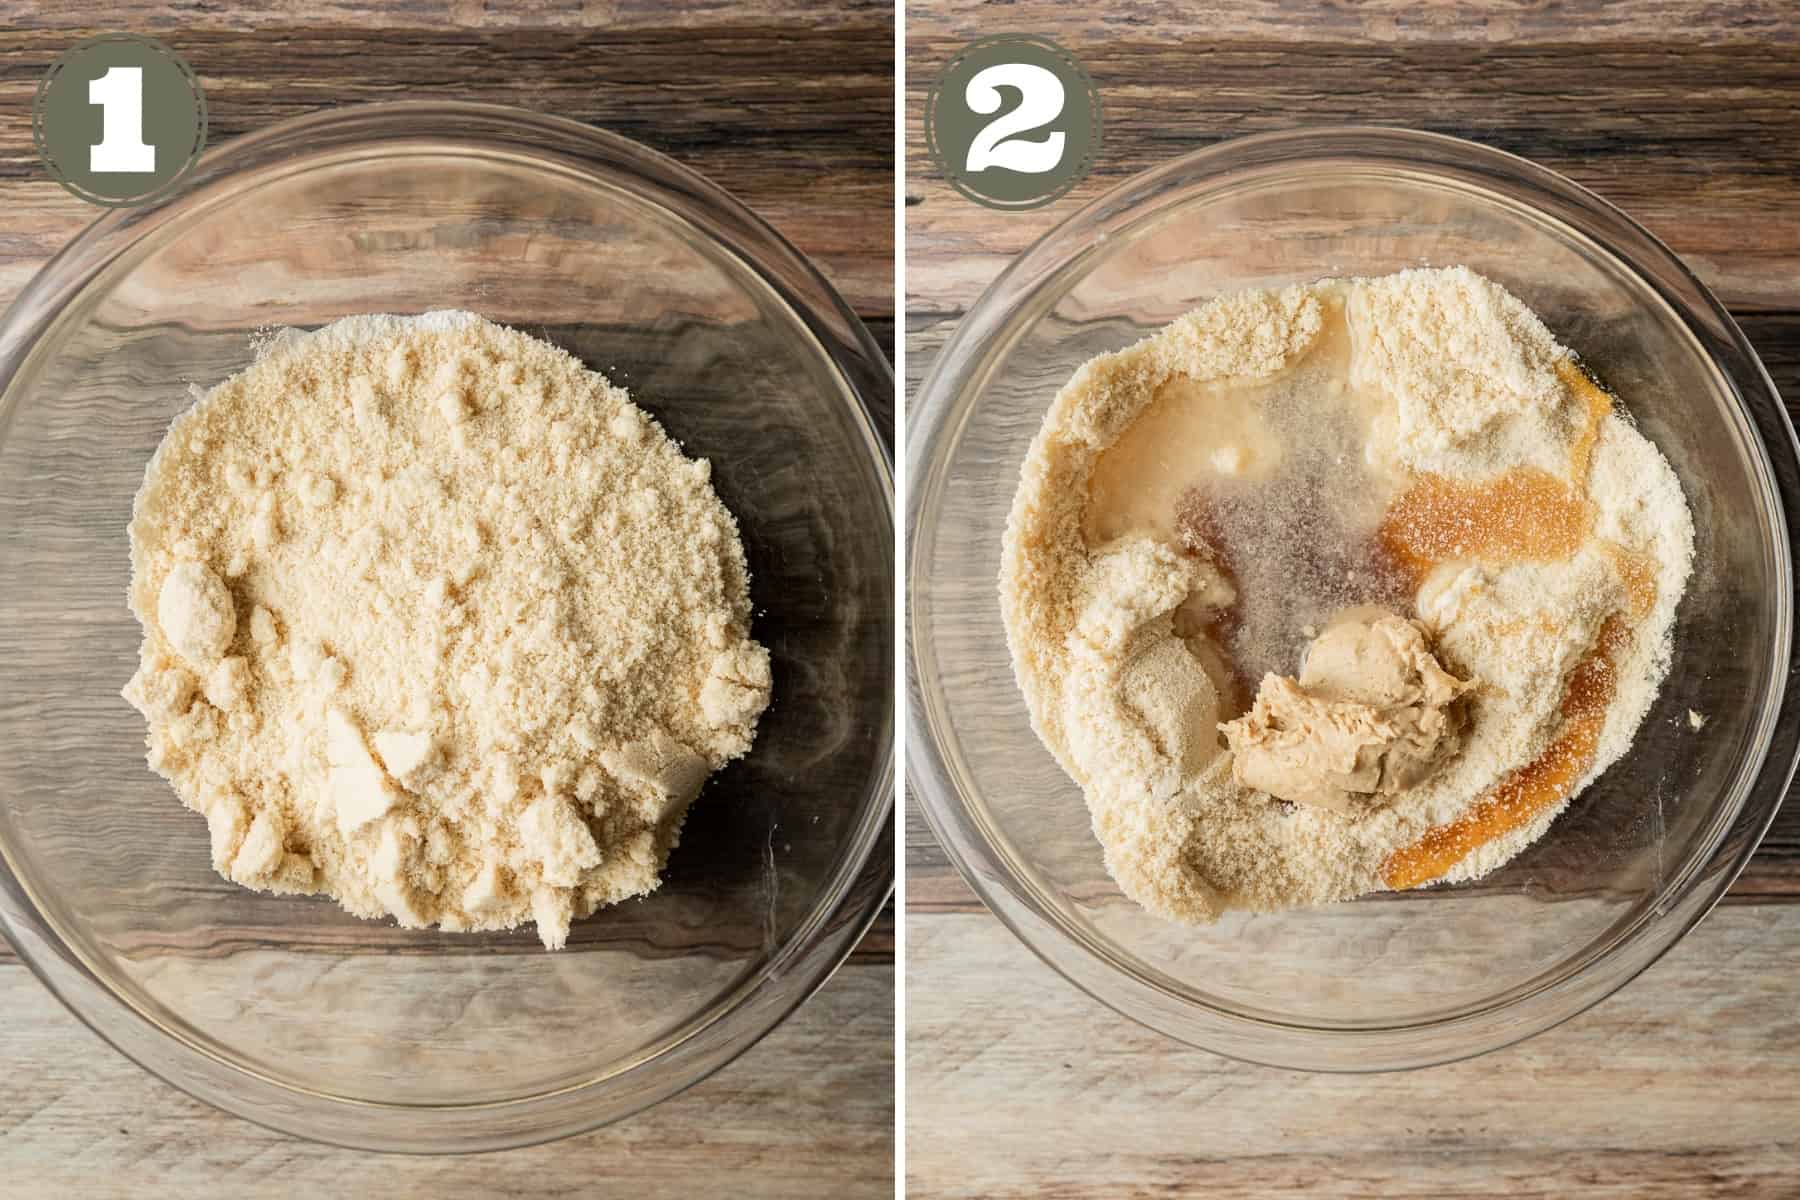 Side by side process shots of the steps to make snickerdoodles including mixing dry and wet ingredients in a glass bowl.